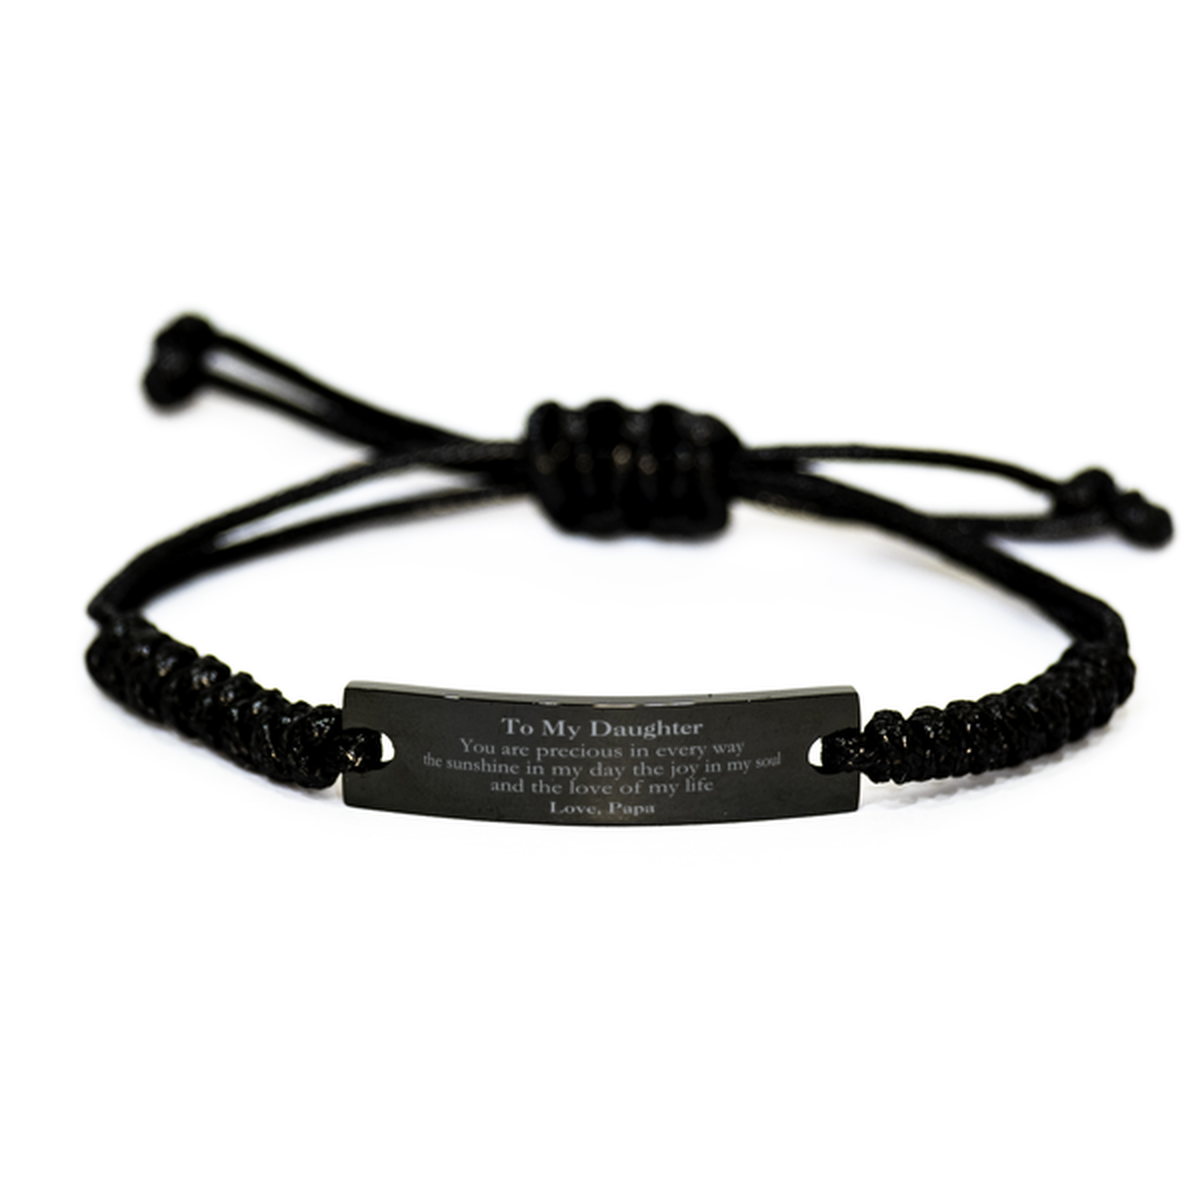 Graduation Gifts for Daughter Black Rope Bracelet Present from Papa, Christmas Daughter Birthday Gifts Daughter You are precious in every way the sunshine in my day. Love, Papa